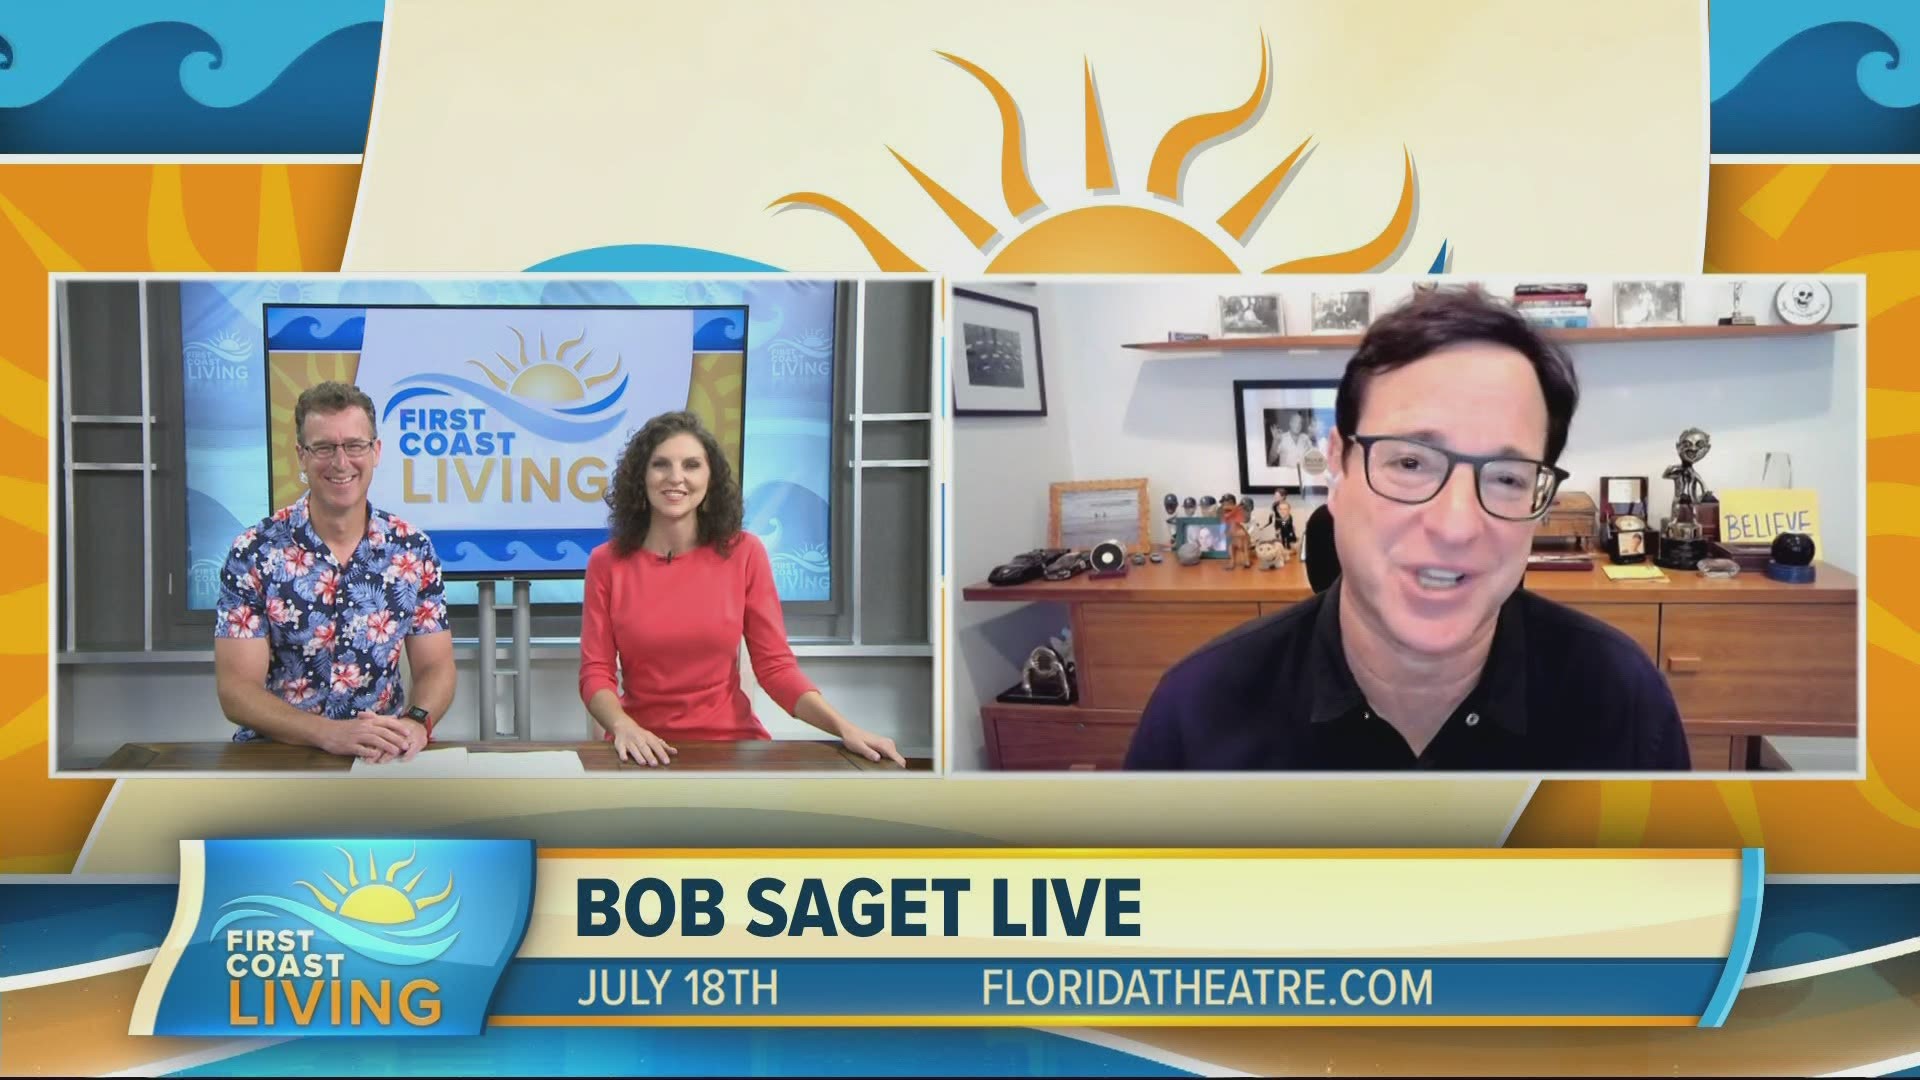 You can catch Bob Saget this Sunday, July 18th at 8 p.m.